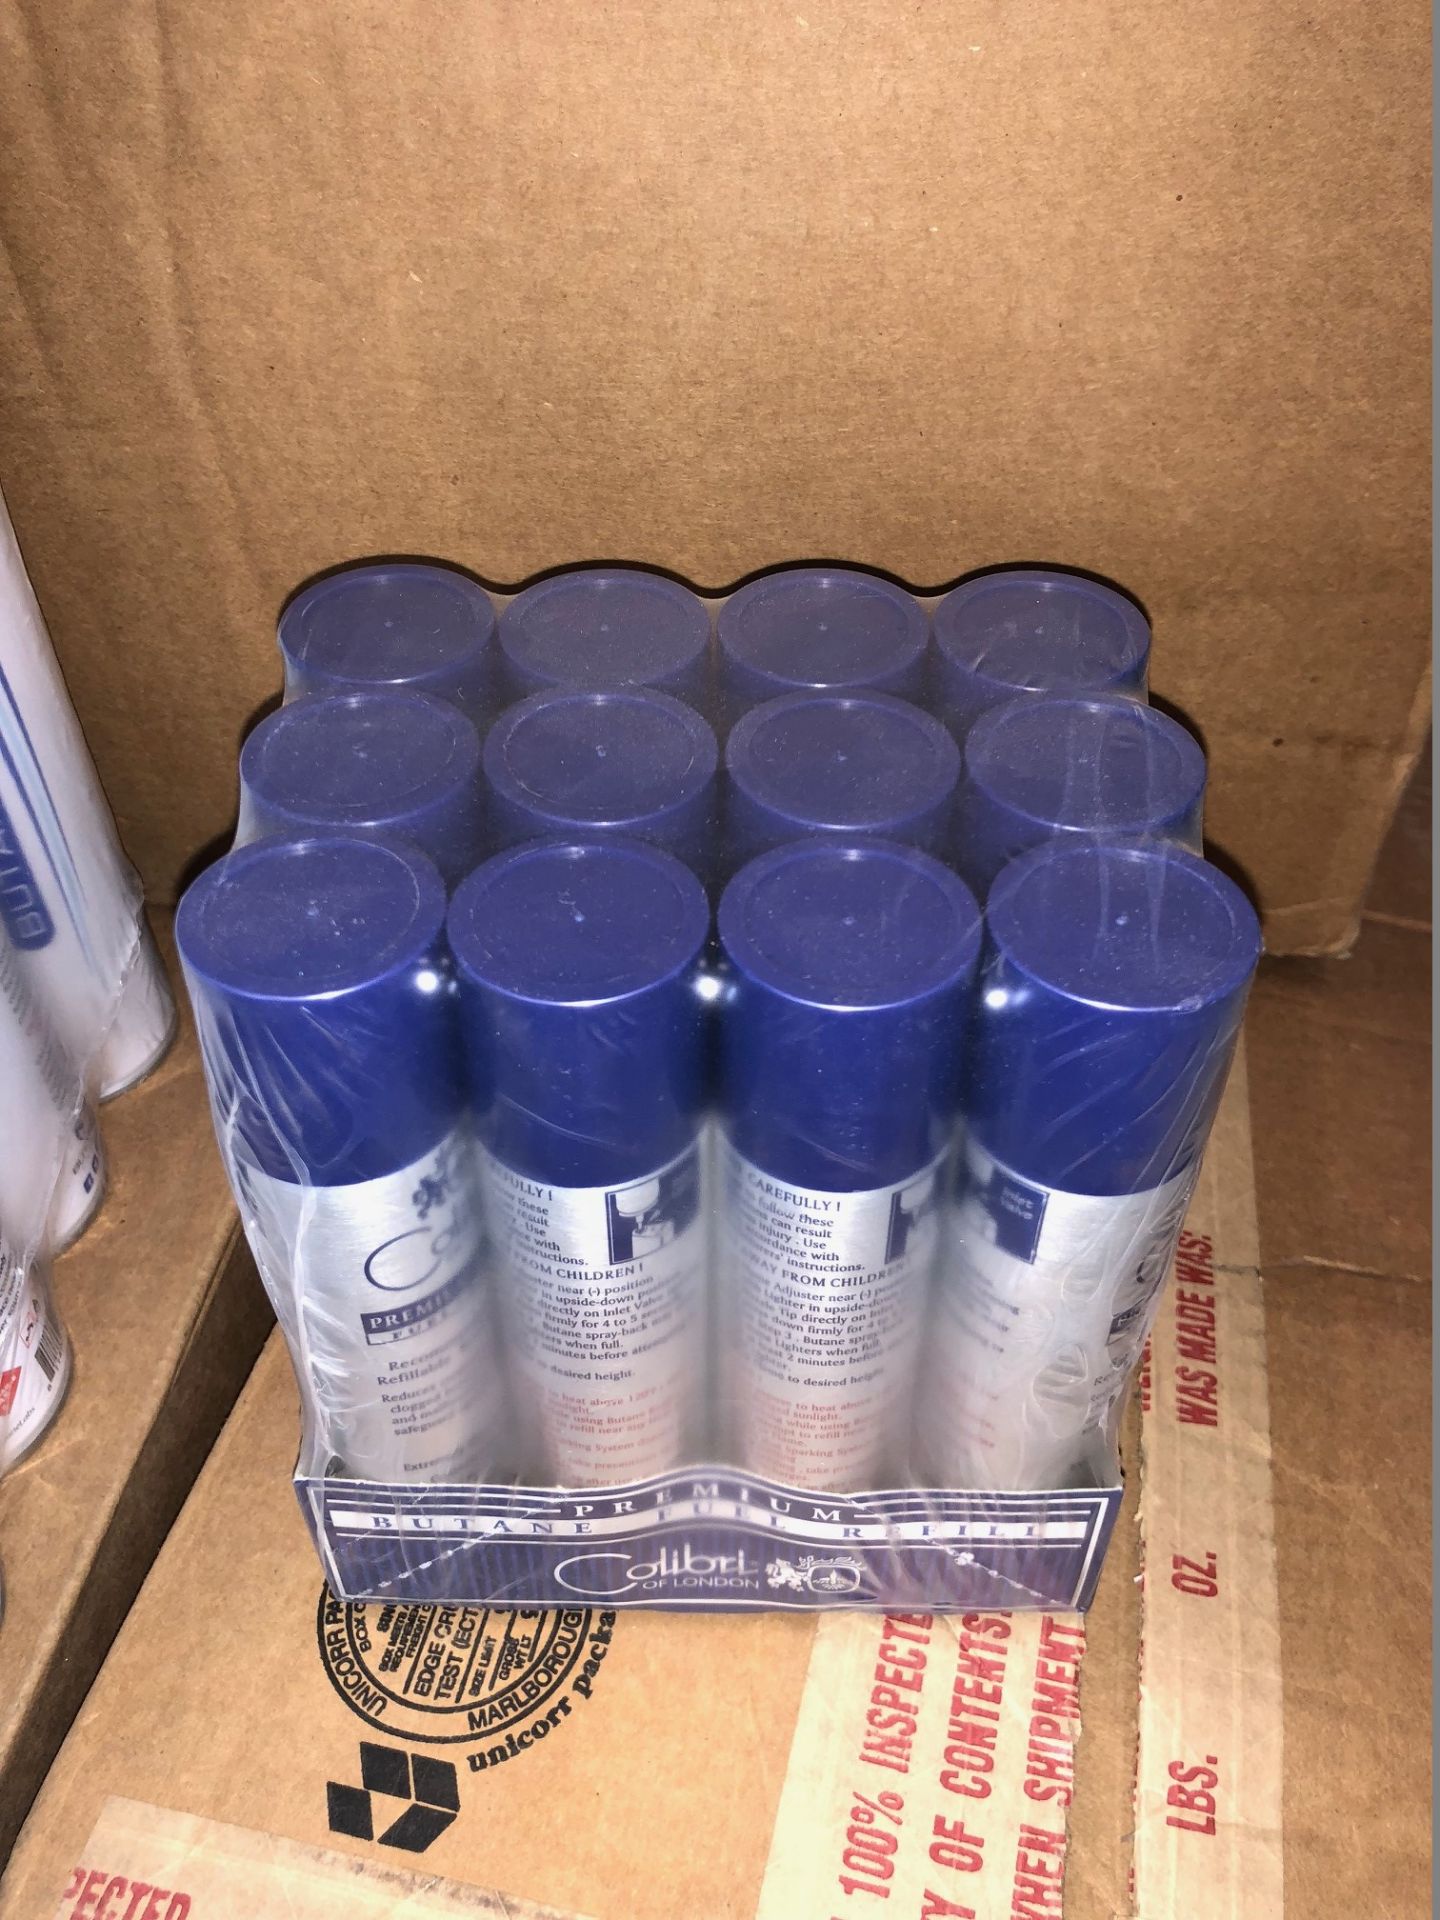 120 x Cans of Colibri of London Butane Gas - 90ml Cans (Brand New & Boxed - Massive Resale Value) - Image 3 of 3